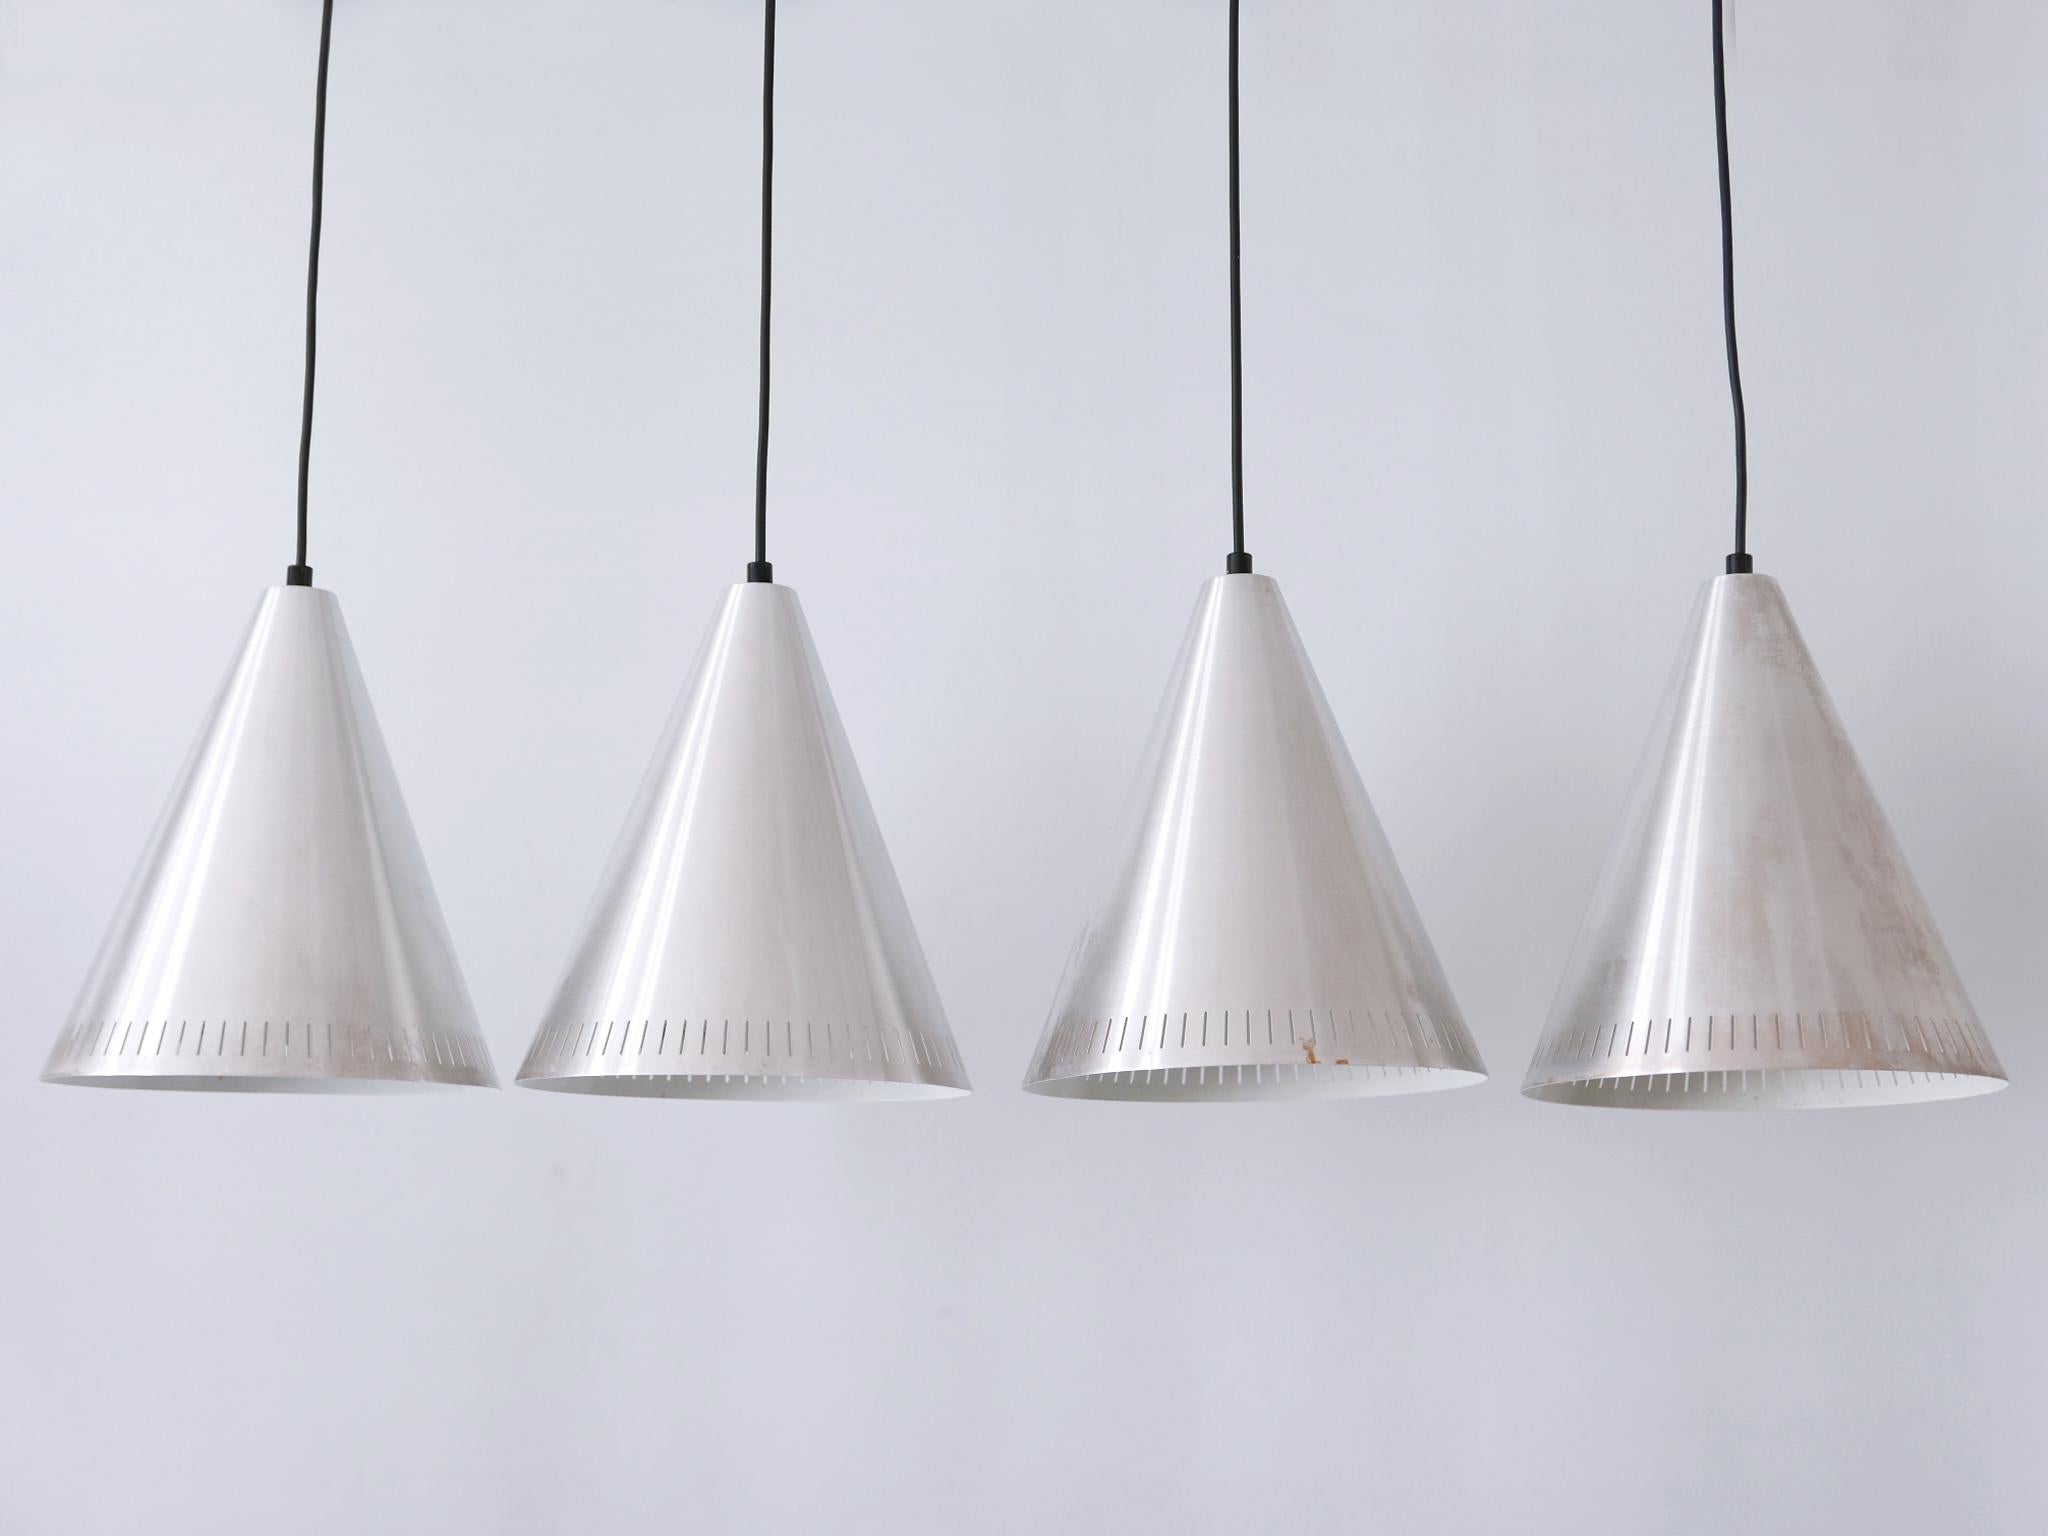 Set of four elegant Mid Century Modern perforated aluminium pendant lamps. Designed and manufactured by Goldkant Leuchten, Germany, 1970s. Label inside the lamp shades.

Executed in perforated aluminium, each pendant lamp has 1 x E27 / E26 Edison